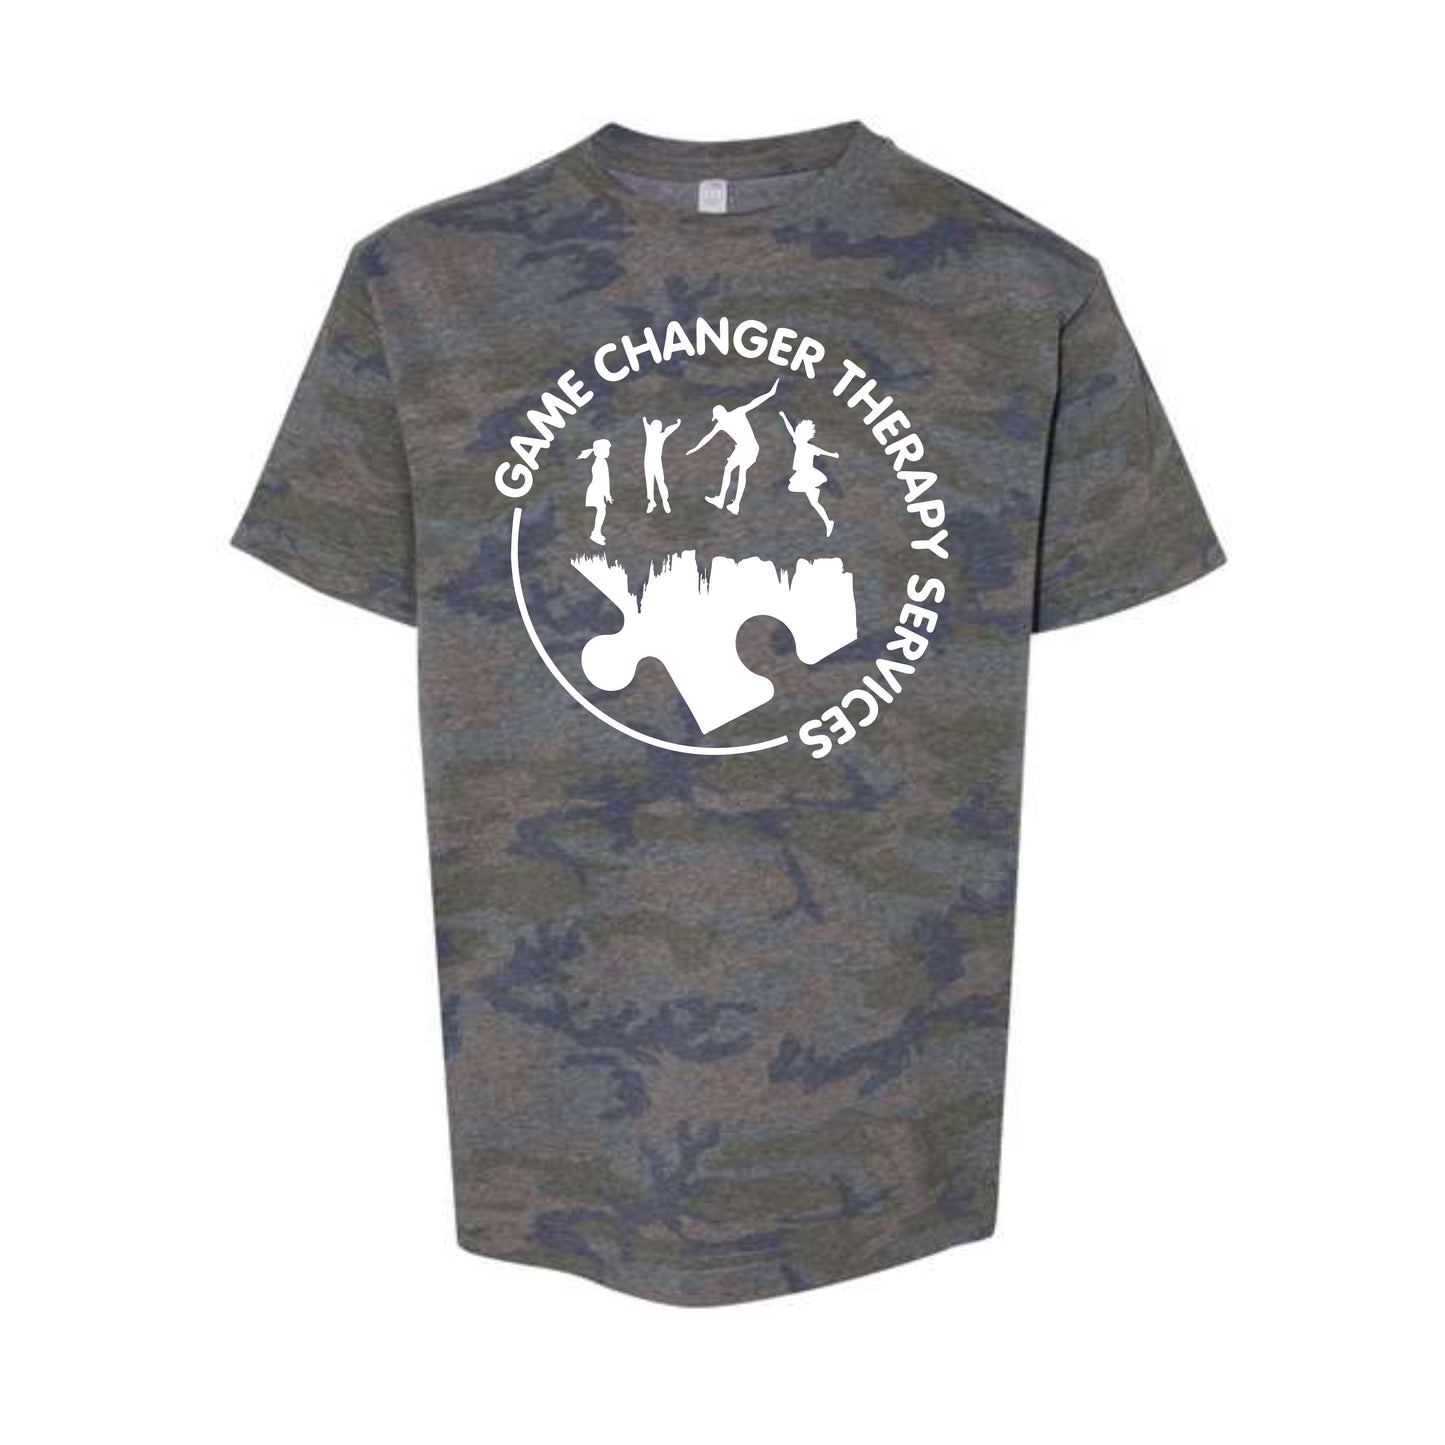 Game Changer Therapy Services Short Sleeve Camo Tee YOUTH SIZES - White Logo